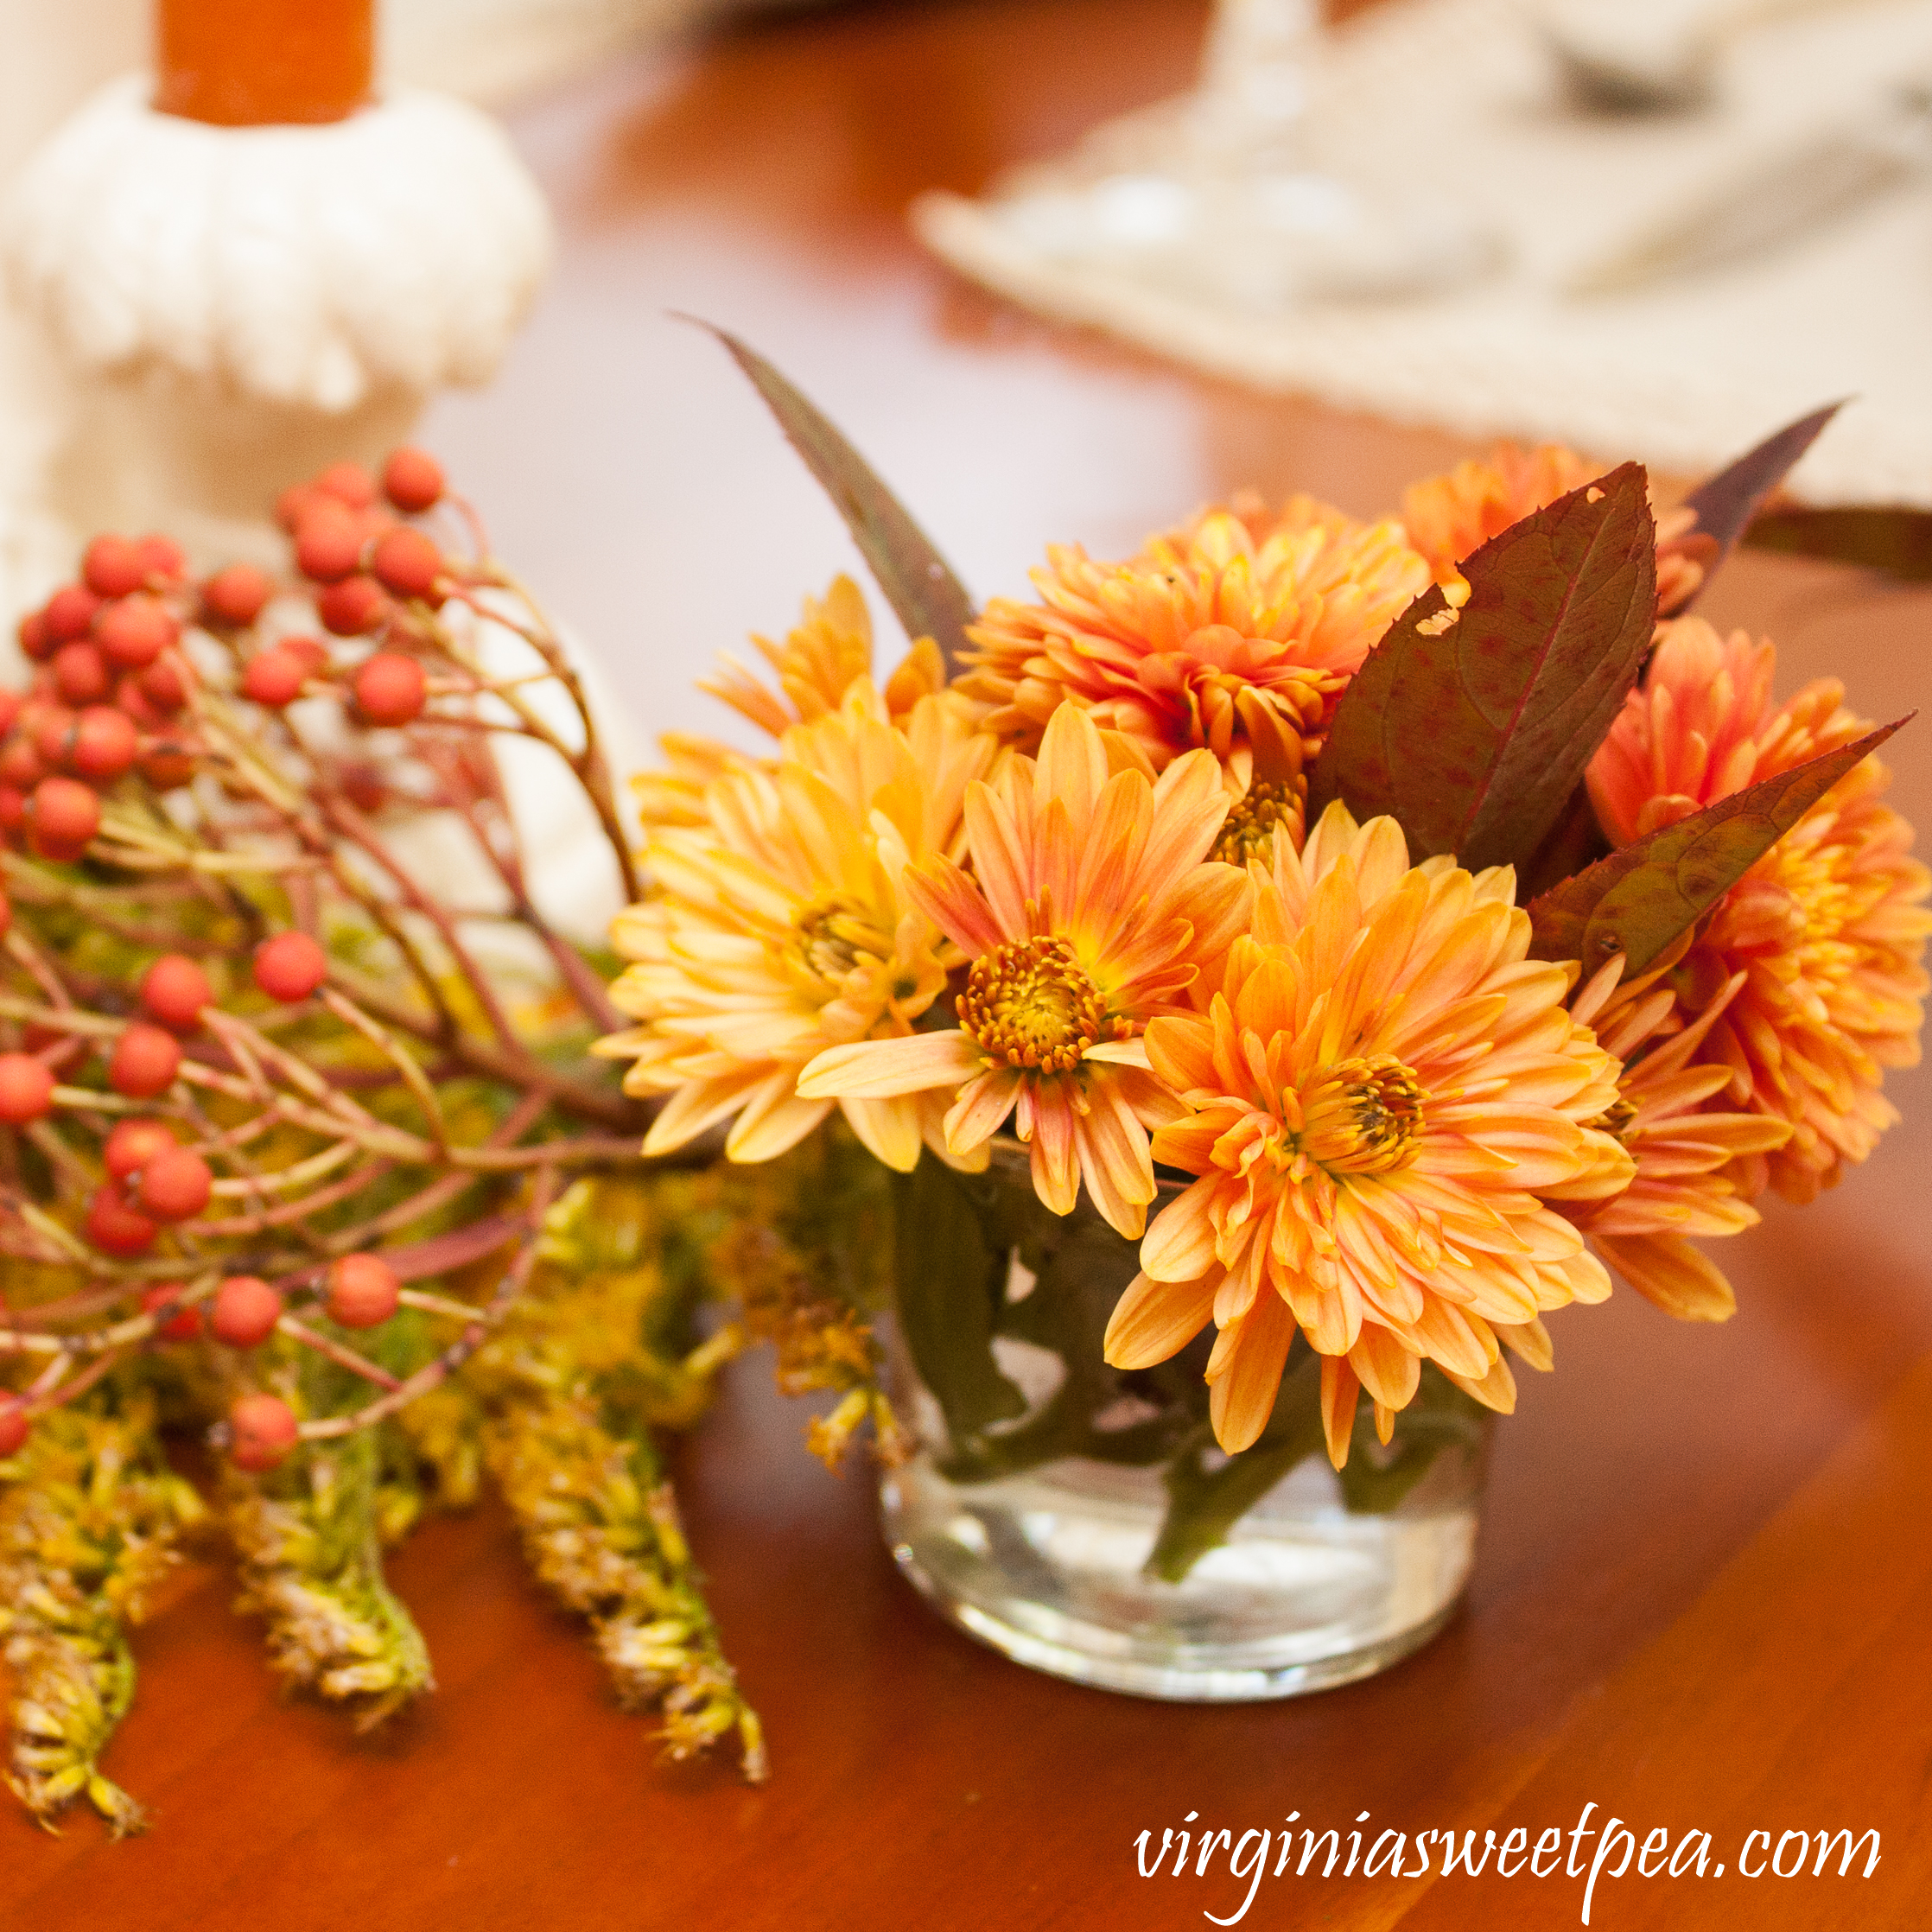 Create easy and inexpensive floral arrangements for your fall or Thanksgiving table with flowers and berries from your yard or neighborhood. #thanksgiving #fallflorals #flowerarrangement #thanksgivingtable